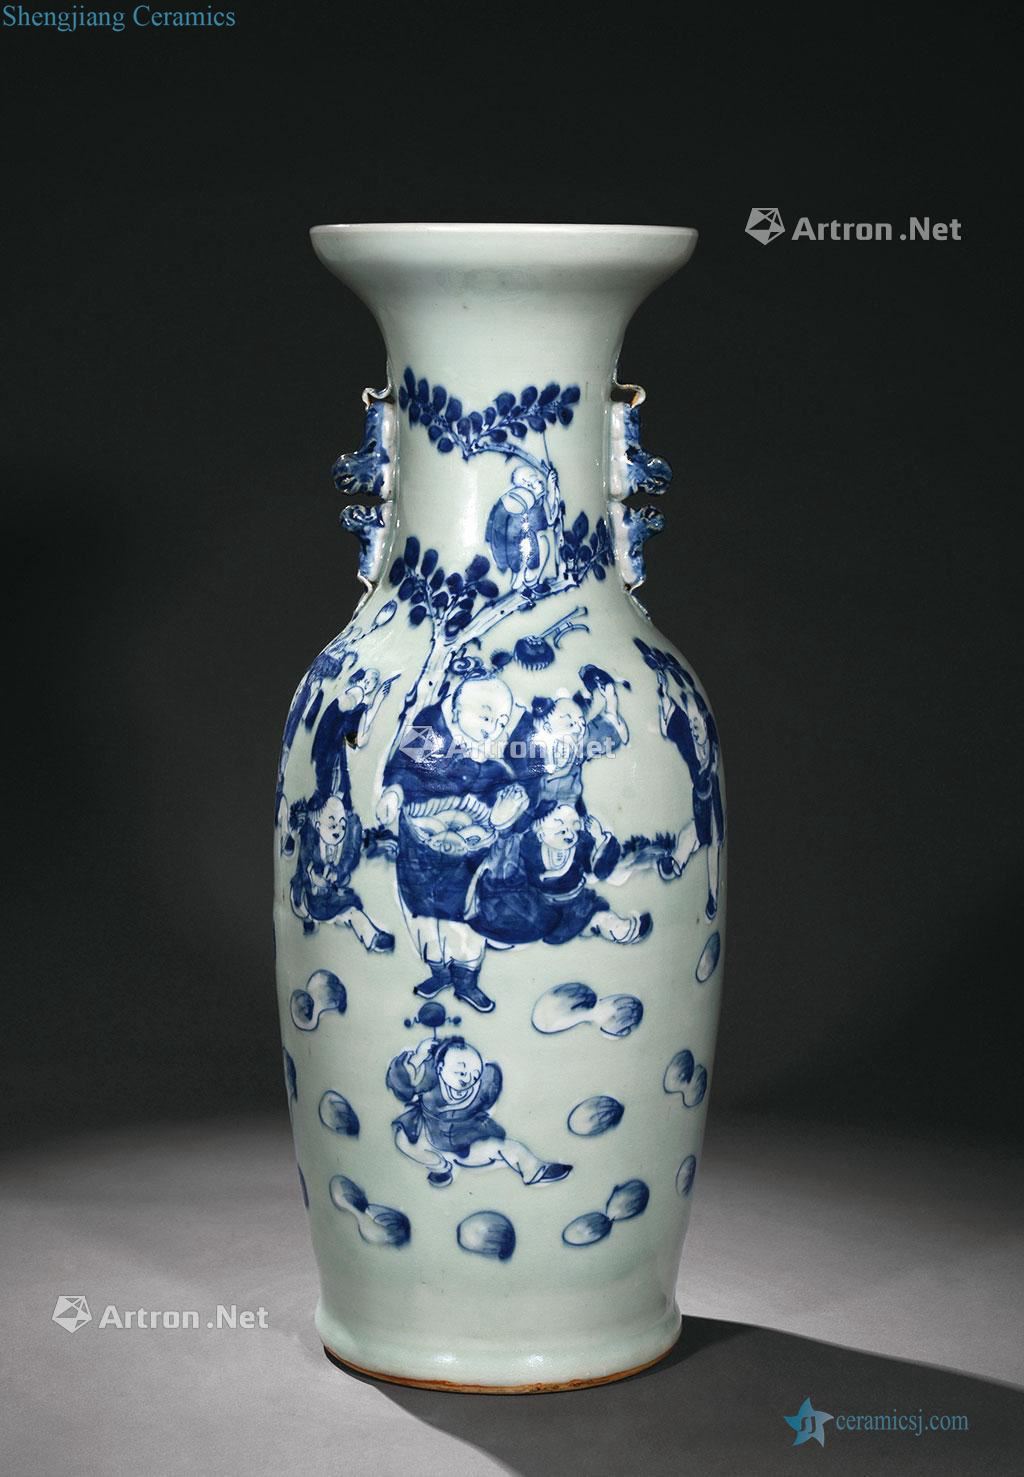 The pea green blue and white vase with a baby lion play